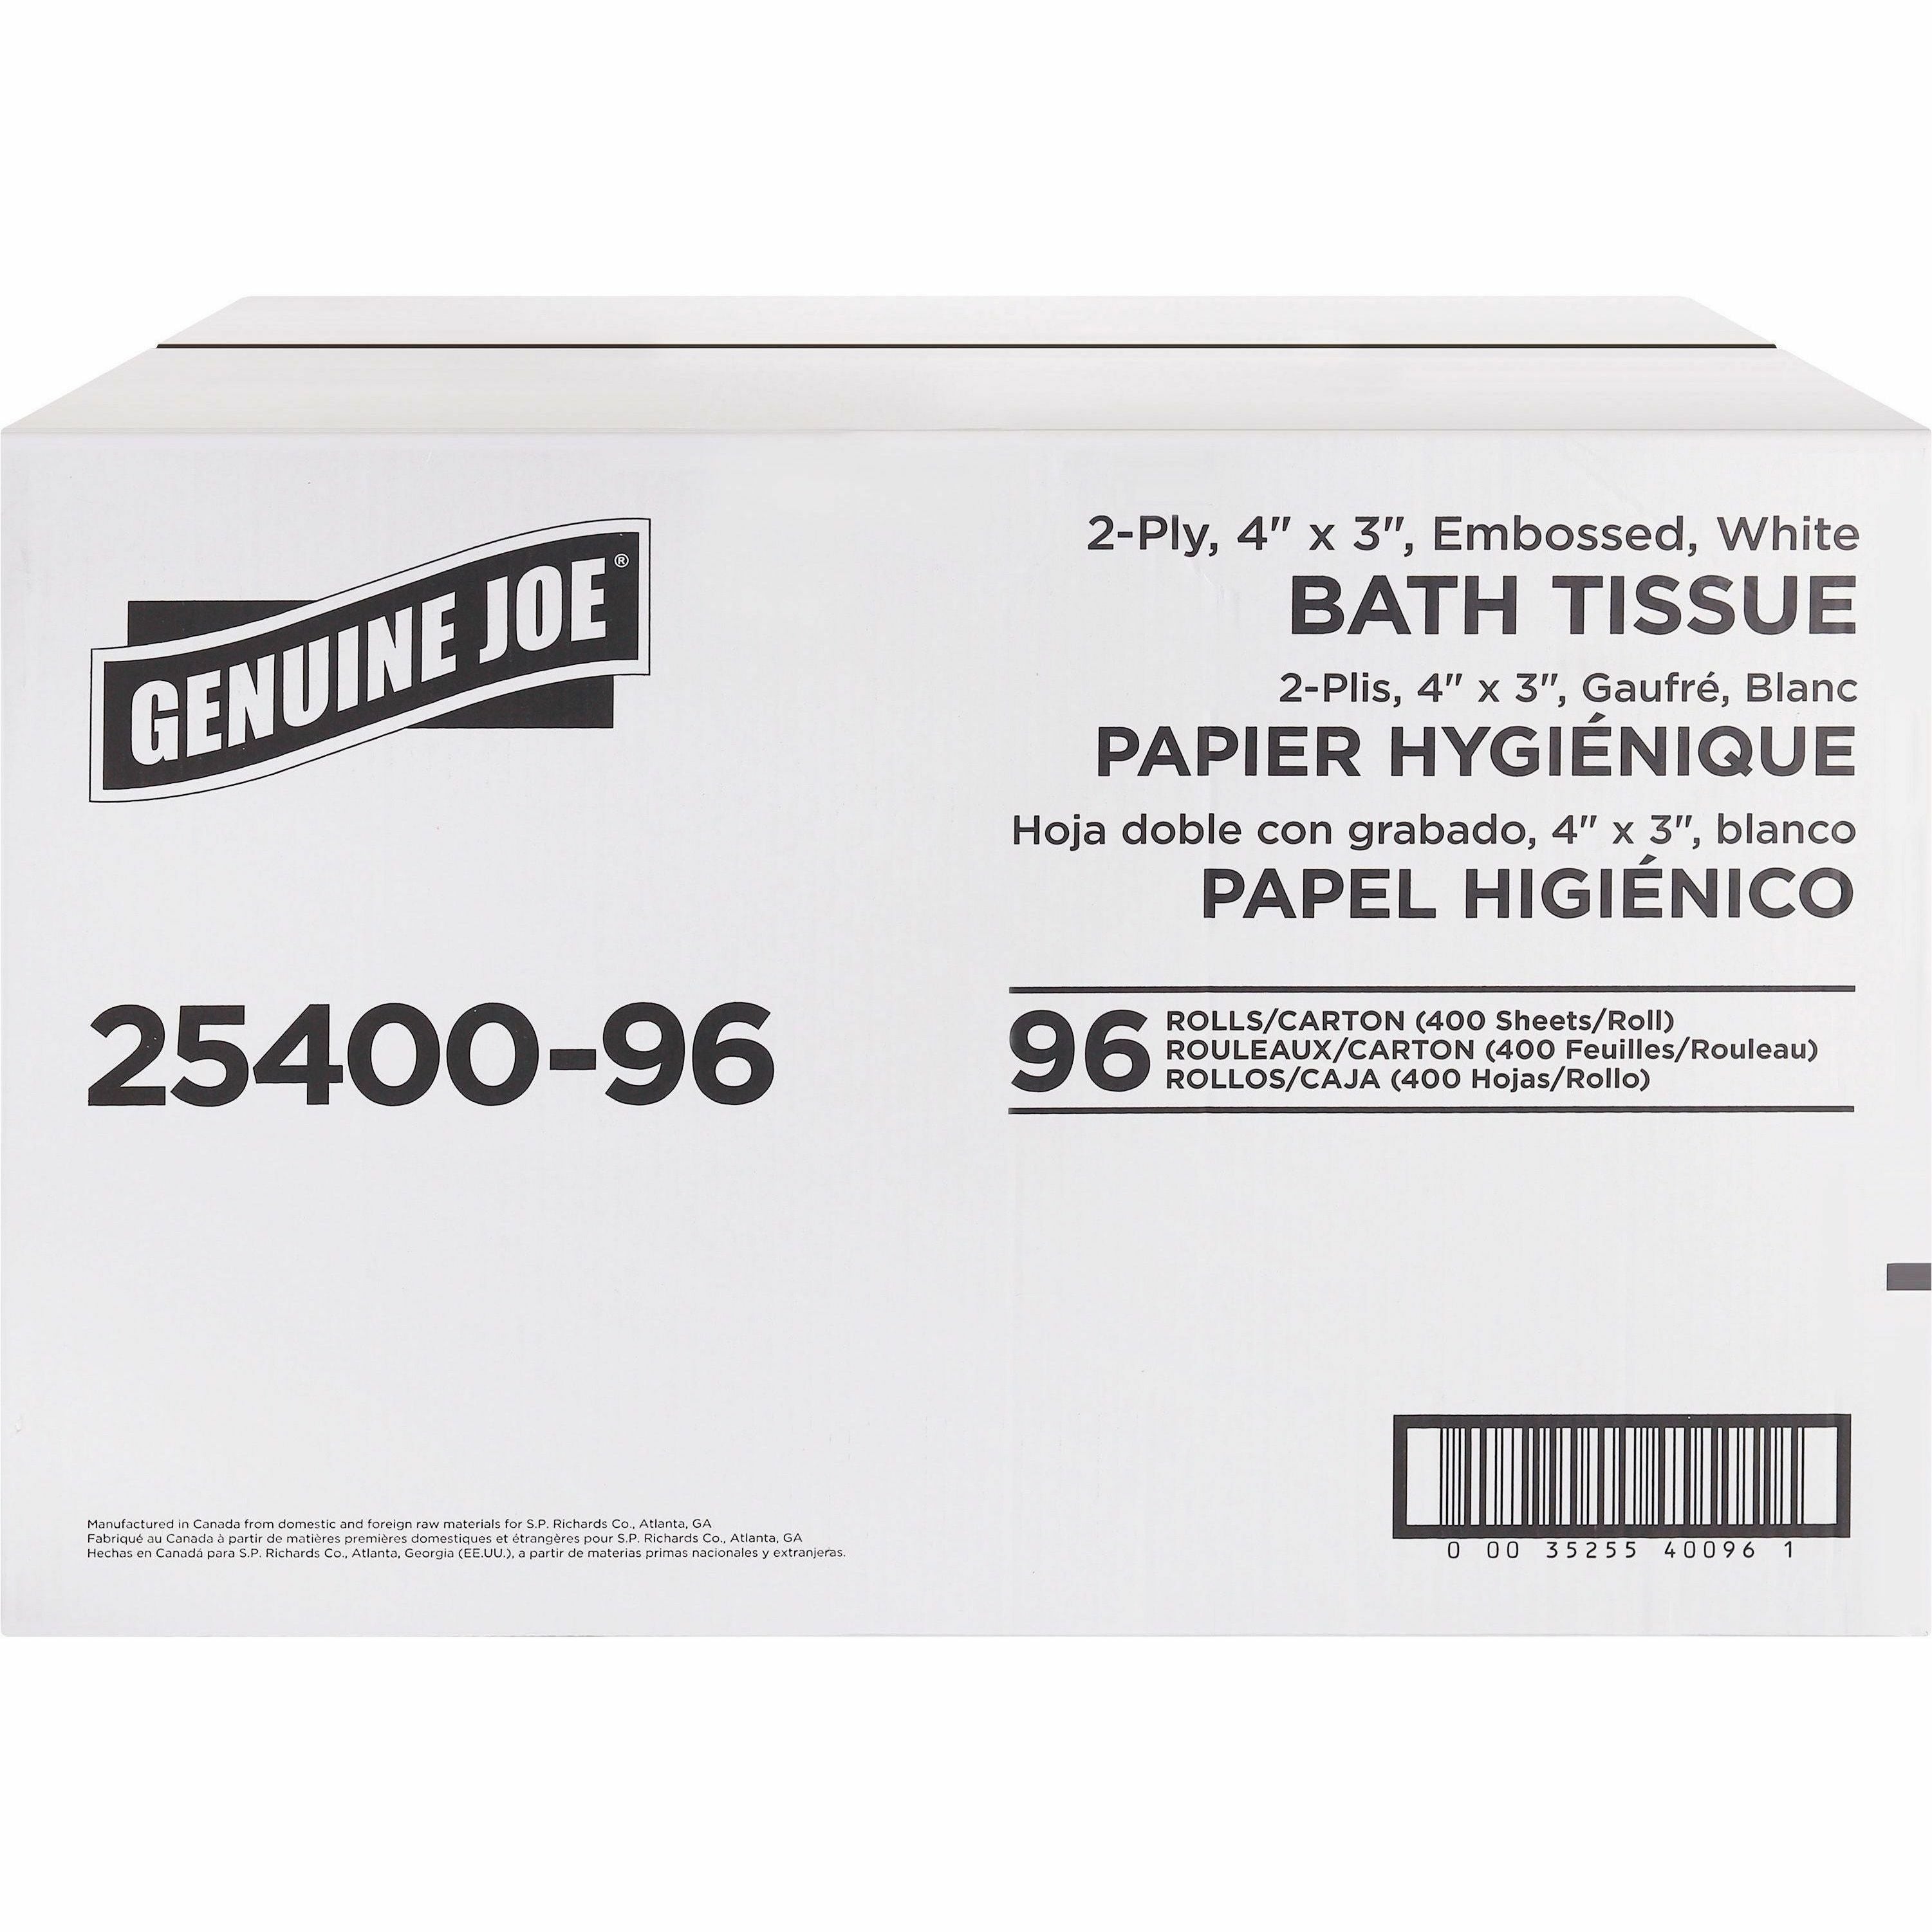 genuine-joe-2-ply-standard-bath-tissue-rolls-2-ply-3-x-4-400-sheets-roll-163-core-white-perforated-absorbent-soft-embossed-for-restroom-96-carton_gjo2540096 - 3